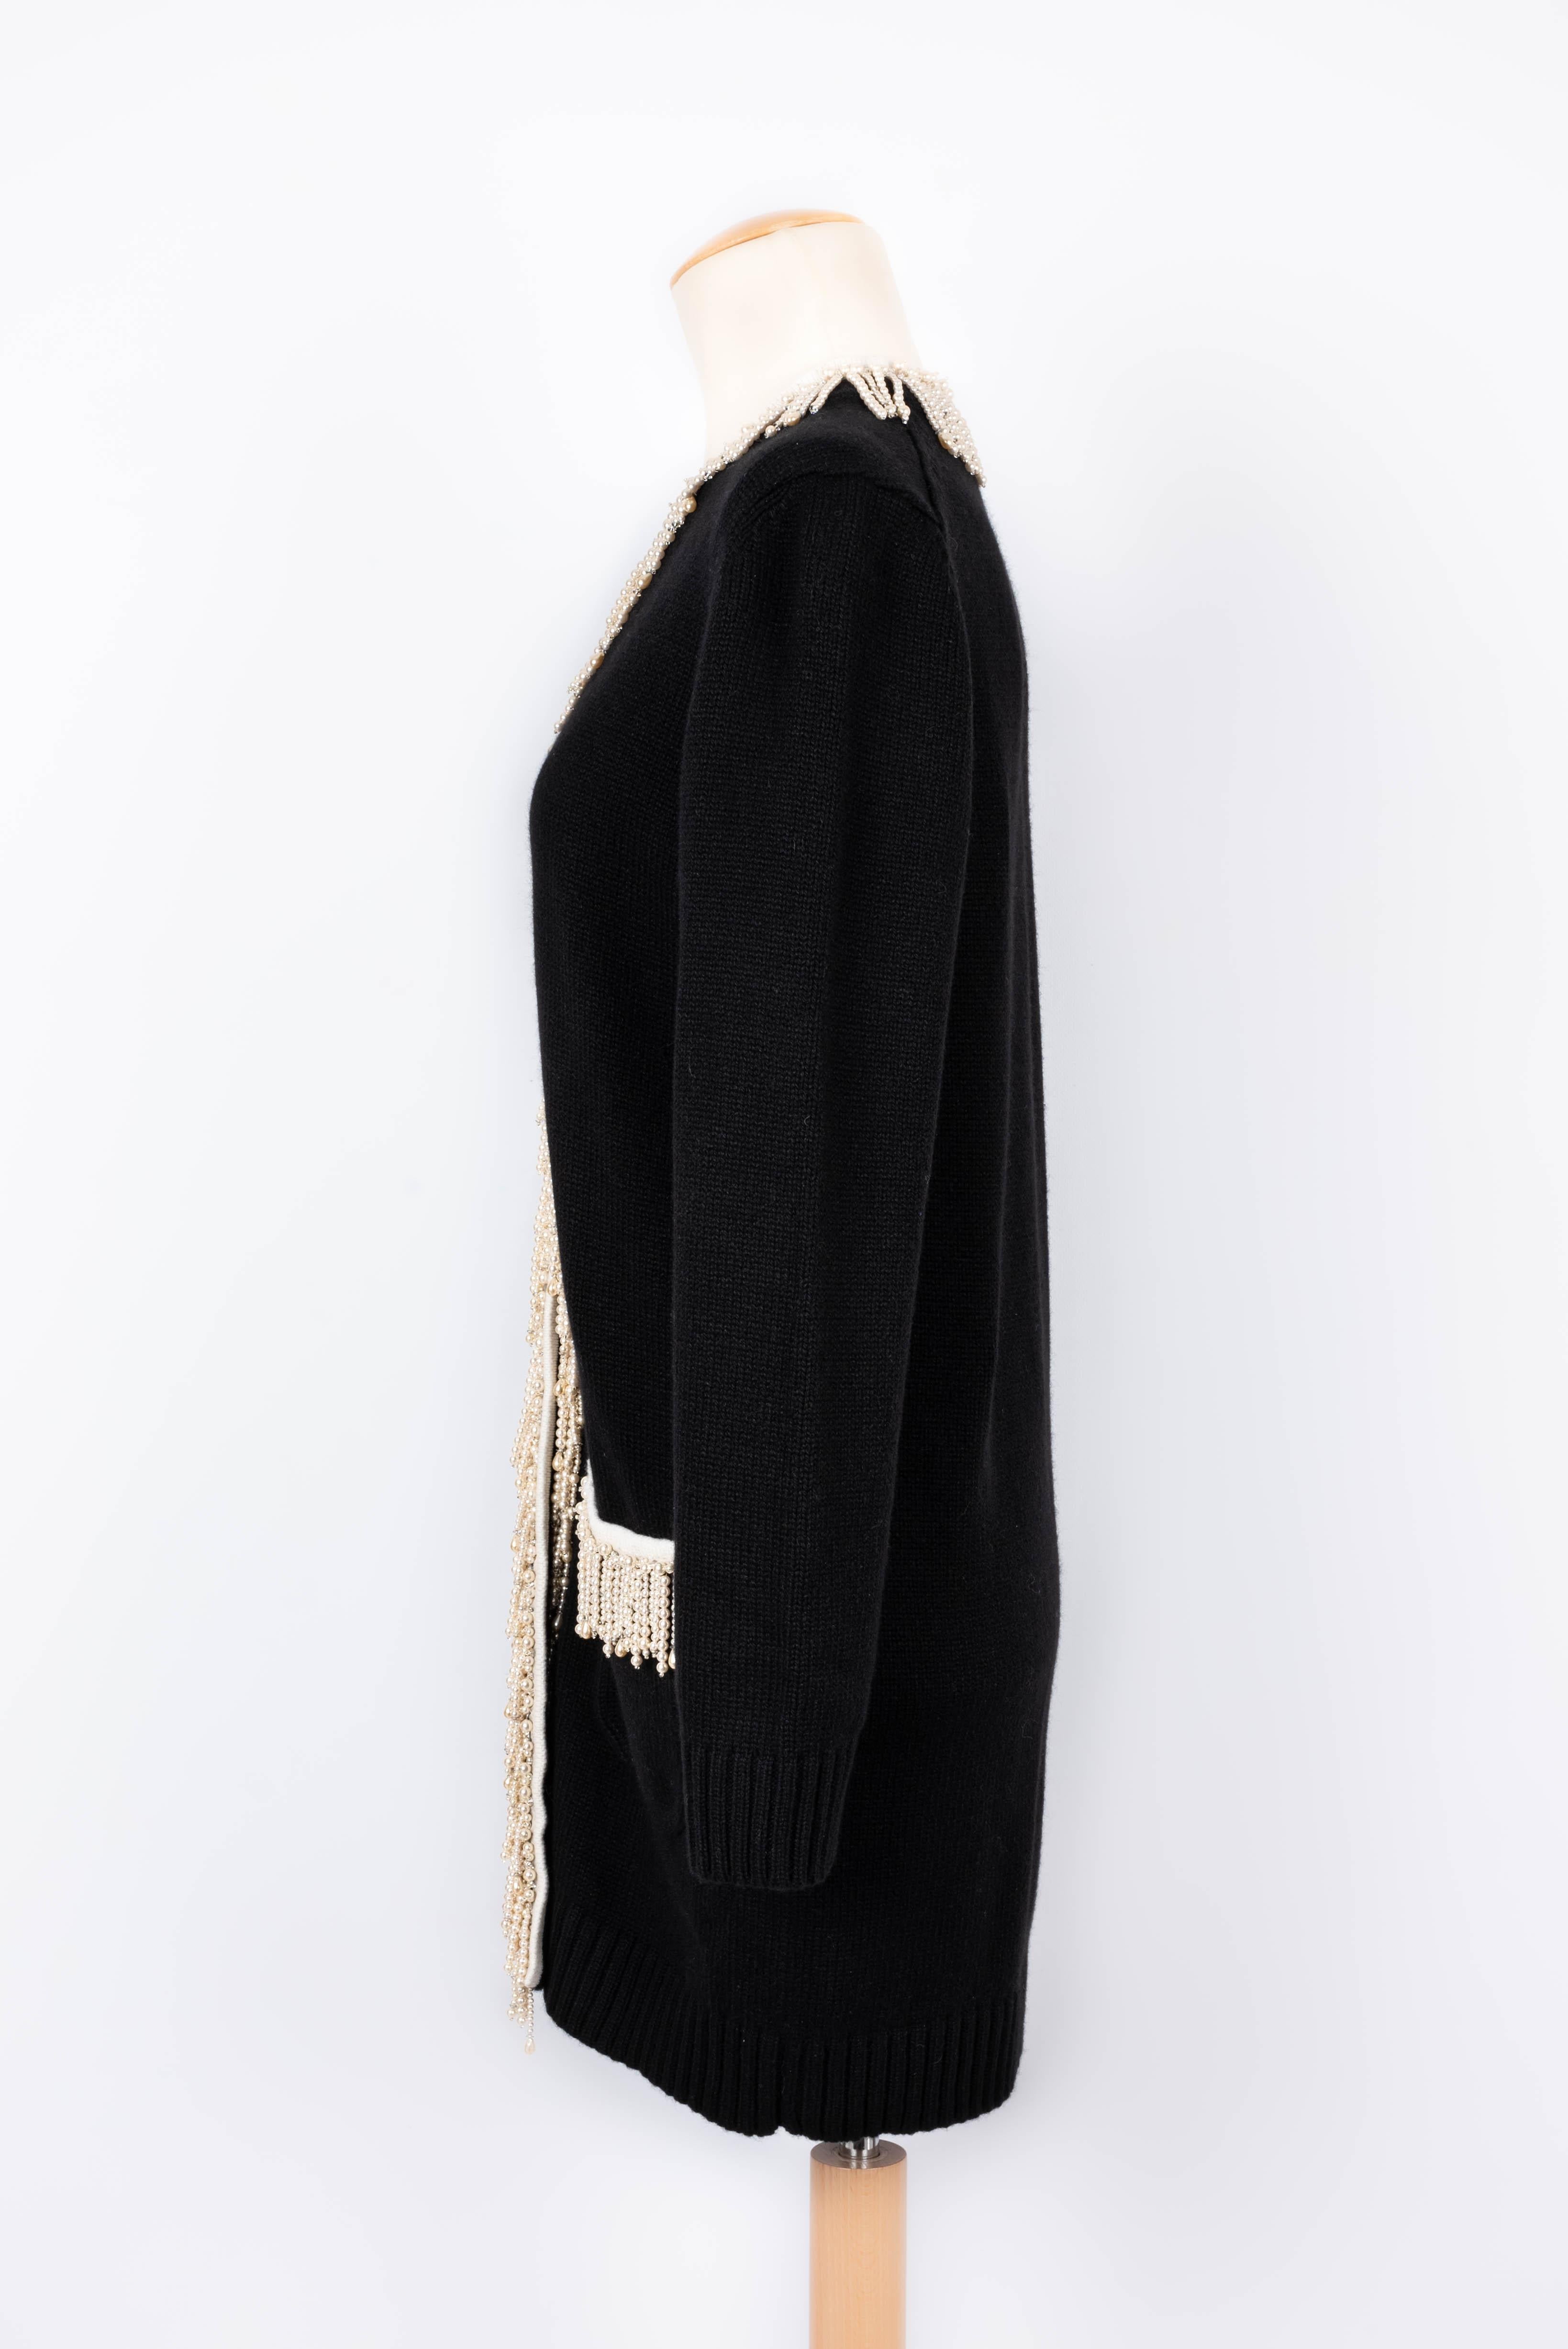 CHANEL - (Made in Italy) Black cardigan in cashmere edged with costume pearls and rhinestones. Size 36FR. Fall-Winter 2021 Ready-to-wear collection.

Condition:
Never worn, with label

Dimensions:
Shoulder width: 42 cm - Sleeve length: 61 cm -